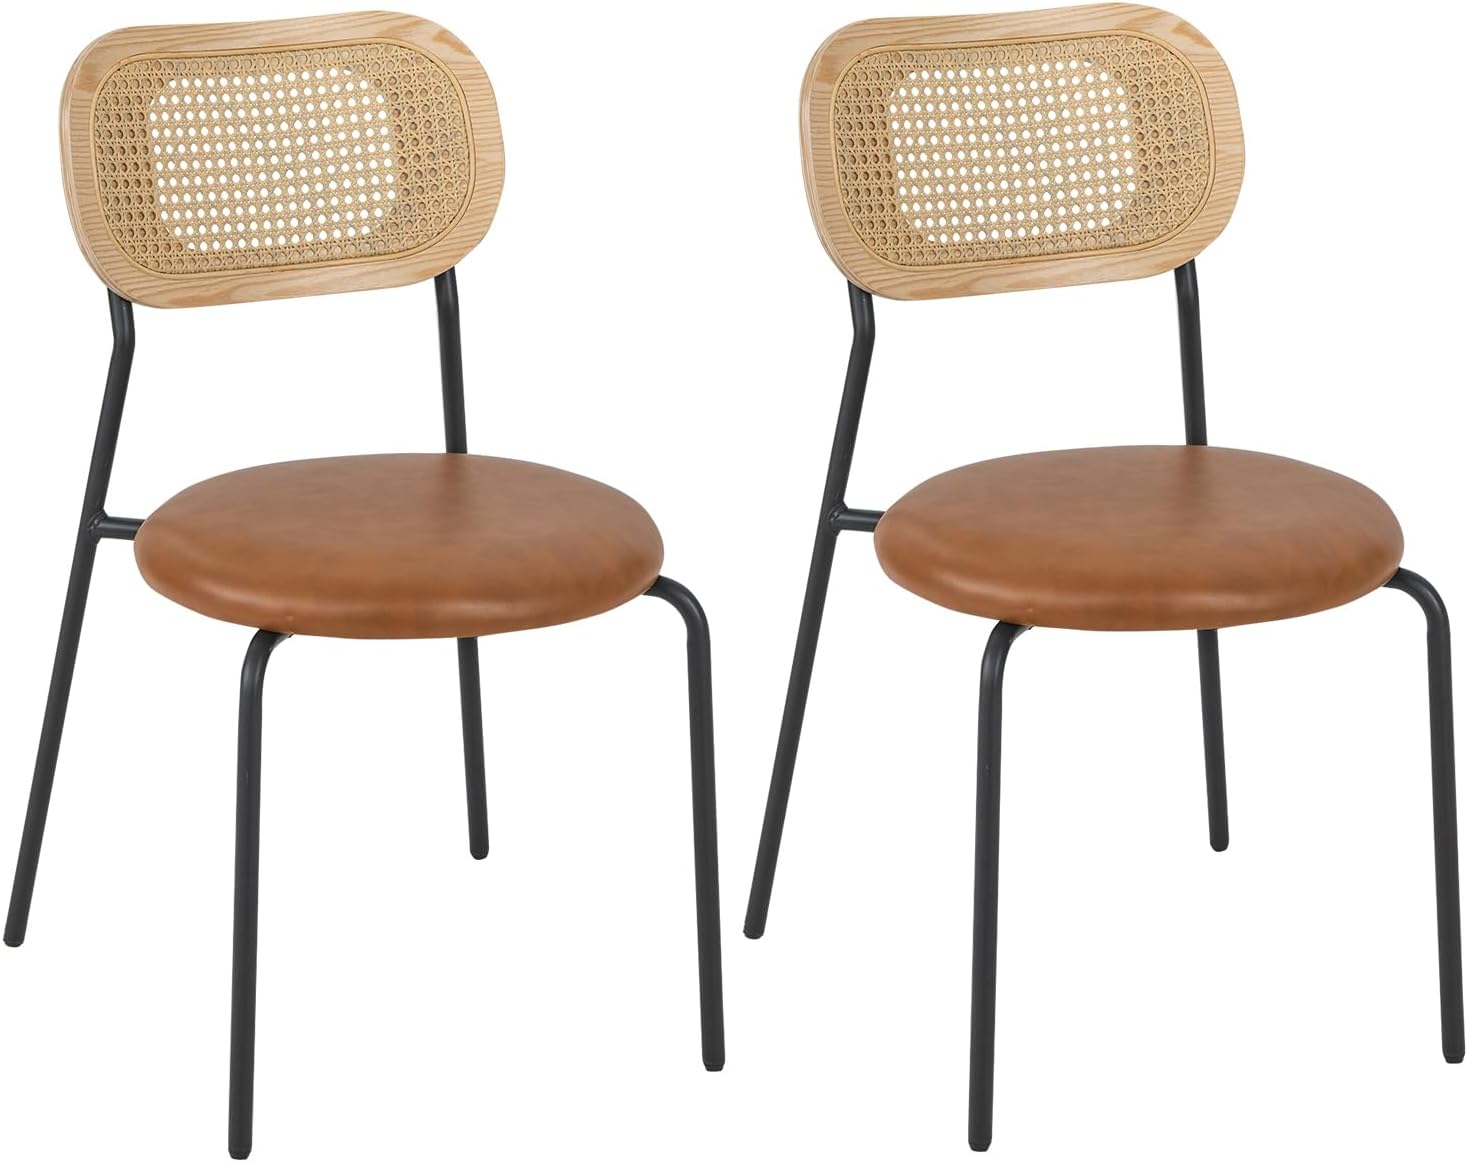 Giantex Rattan Dining Chair Set of 2, Upholstered Side Dining Chairs with Metal Legs